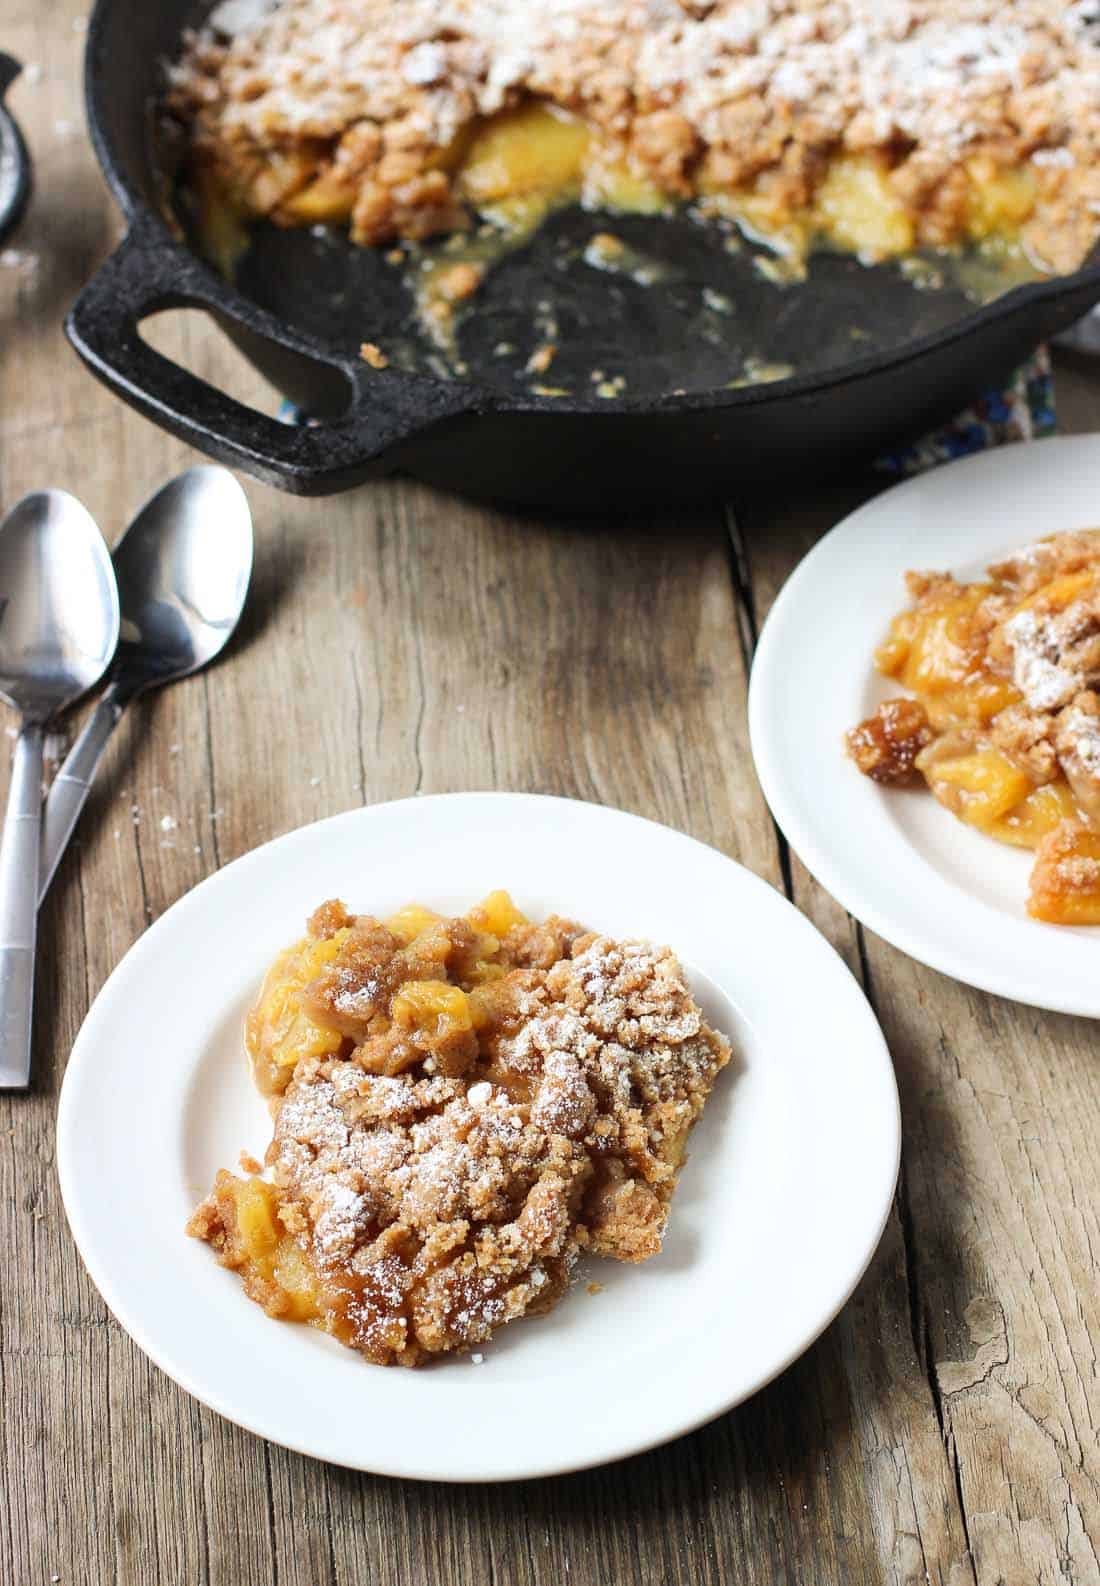 Two plates of portioned out peach crisp on a wooden table next to two dessert spoons and a cast iron pan